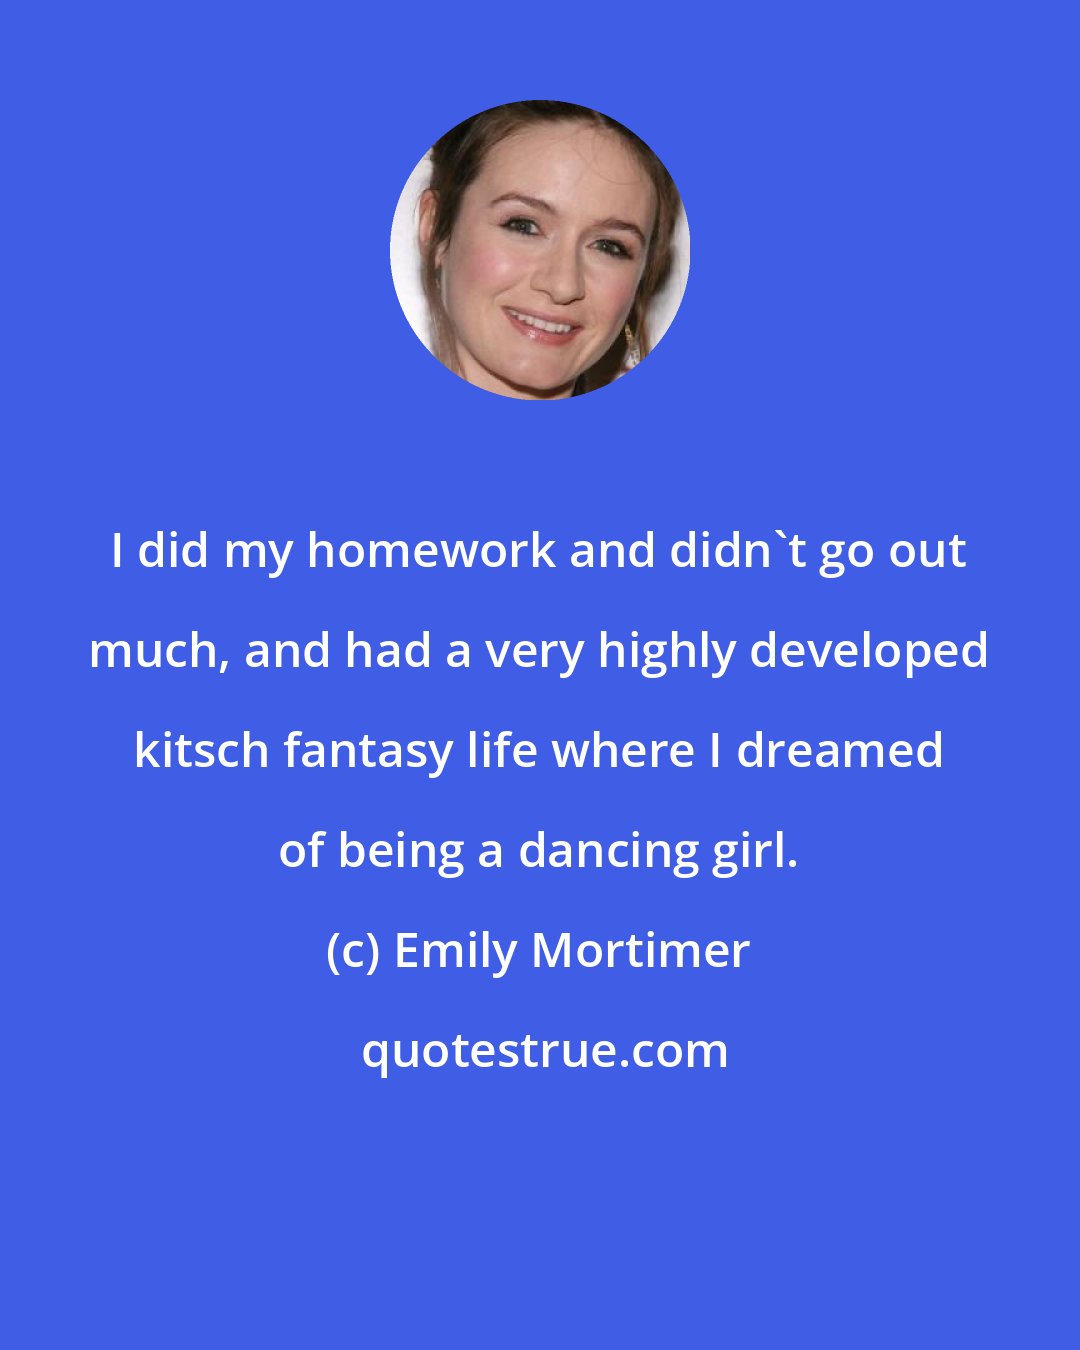 Emily Mortimer: I did my homework and didn't go out much, and had a very highly developed kitsch fantasy life where I dreamed of being a dancing girl.